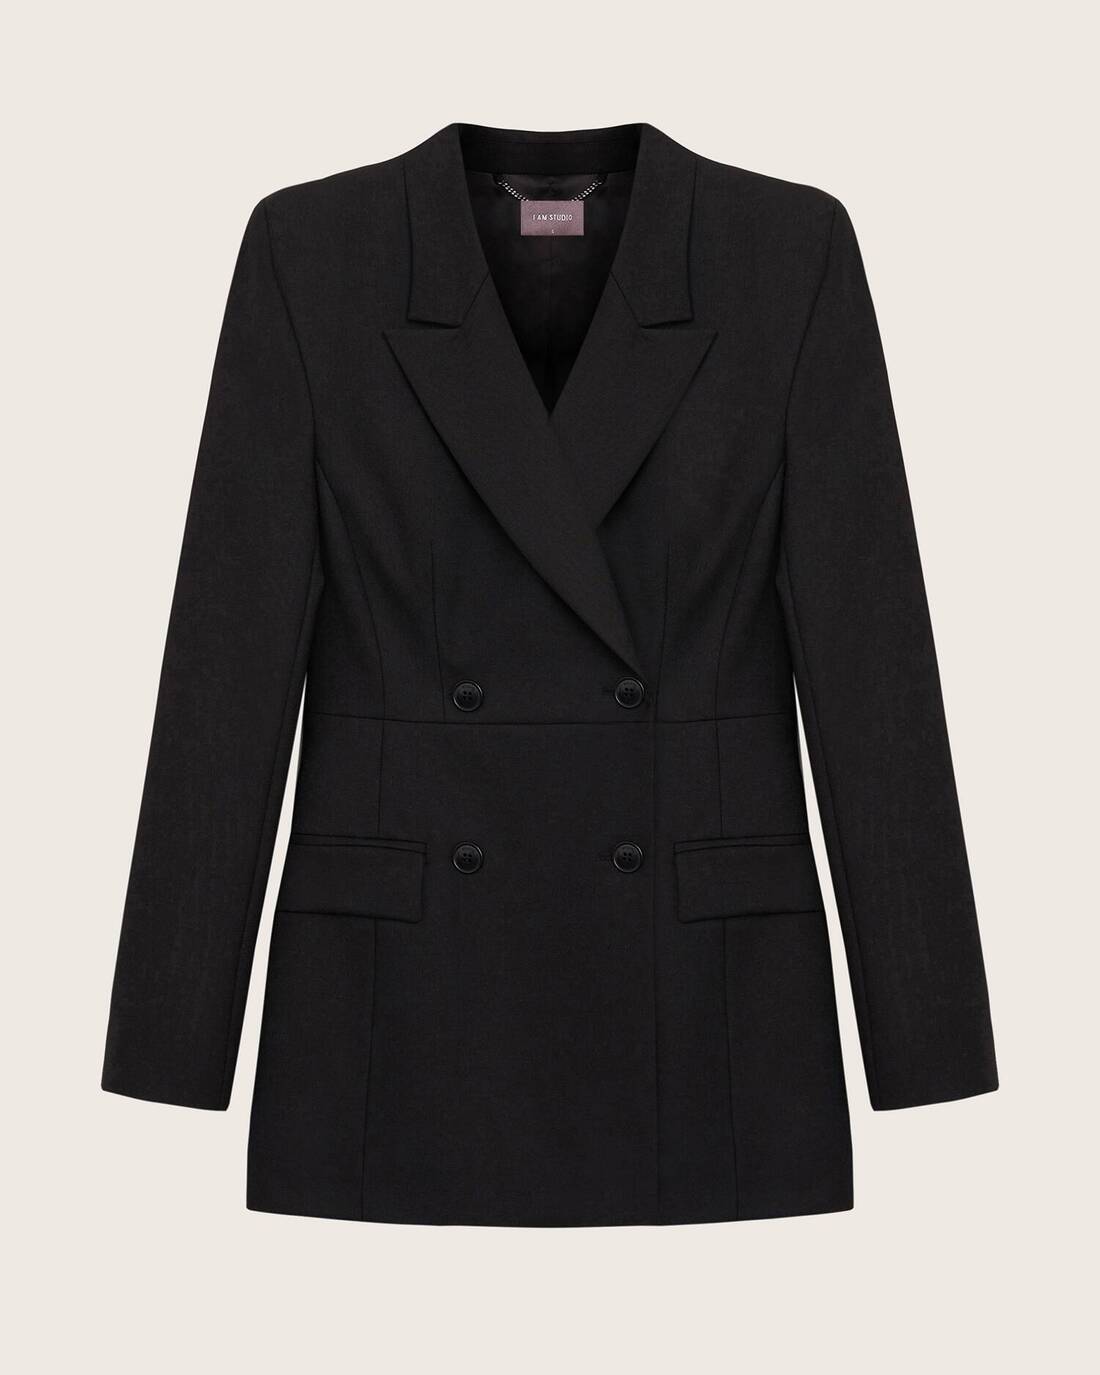  Slim-fit double-breasted jacket 